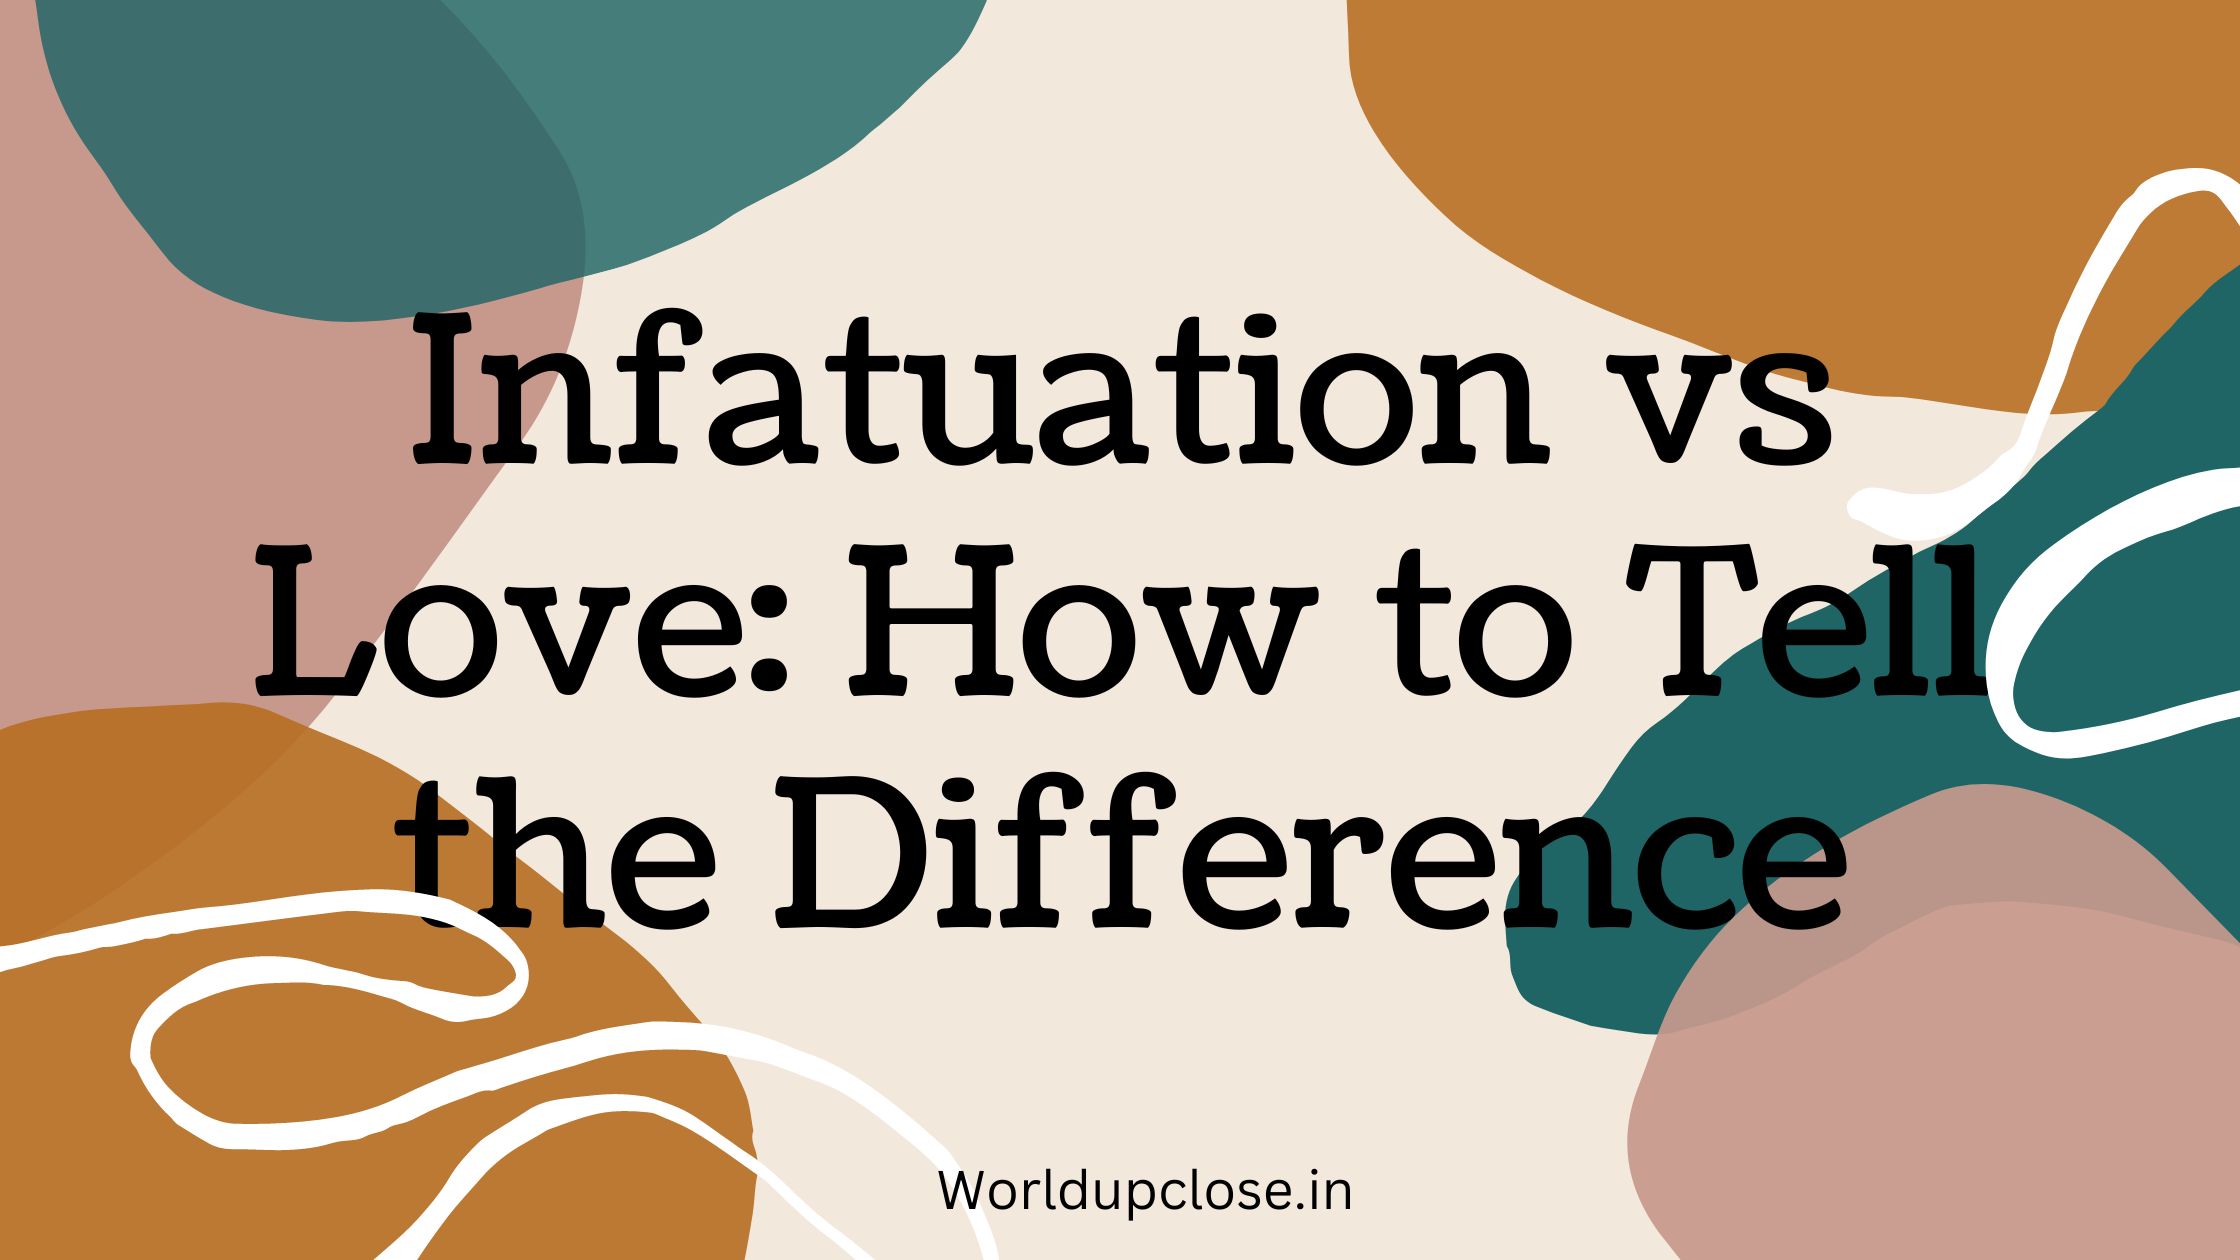 Infatuation vs Love: How to Tell the Difference 2